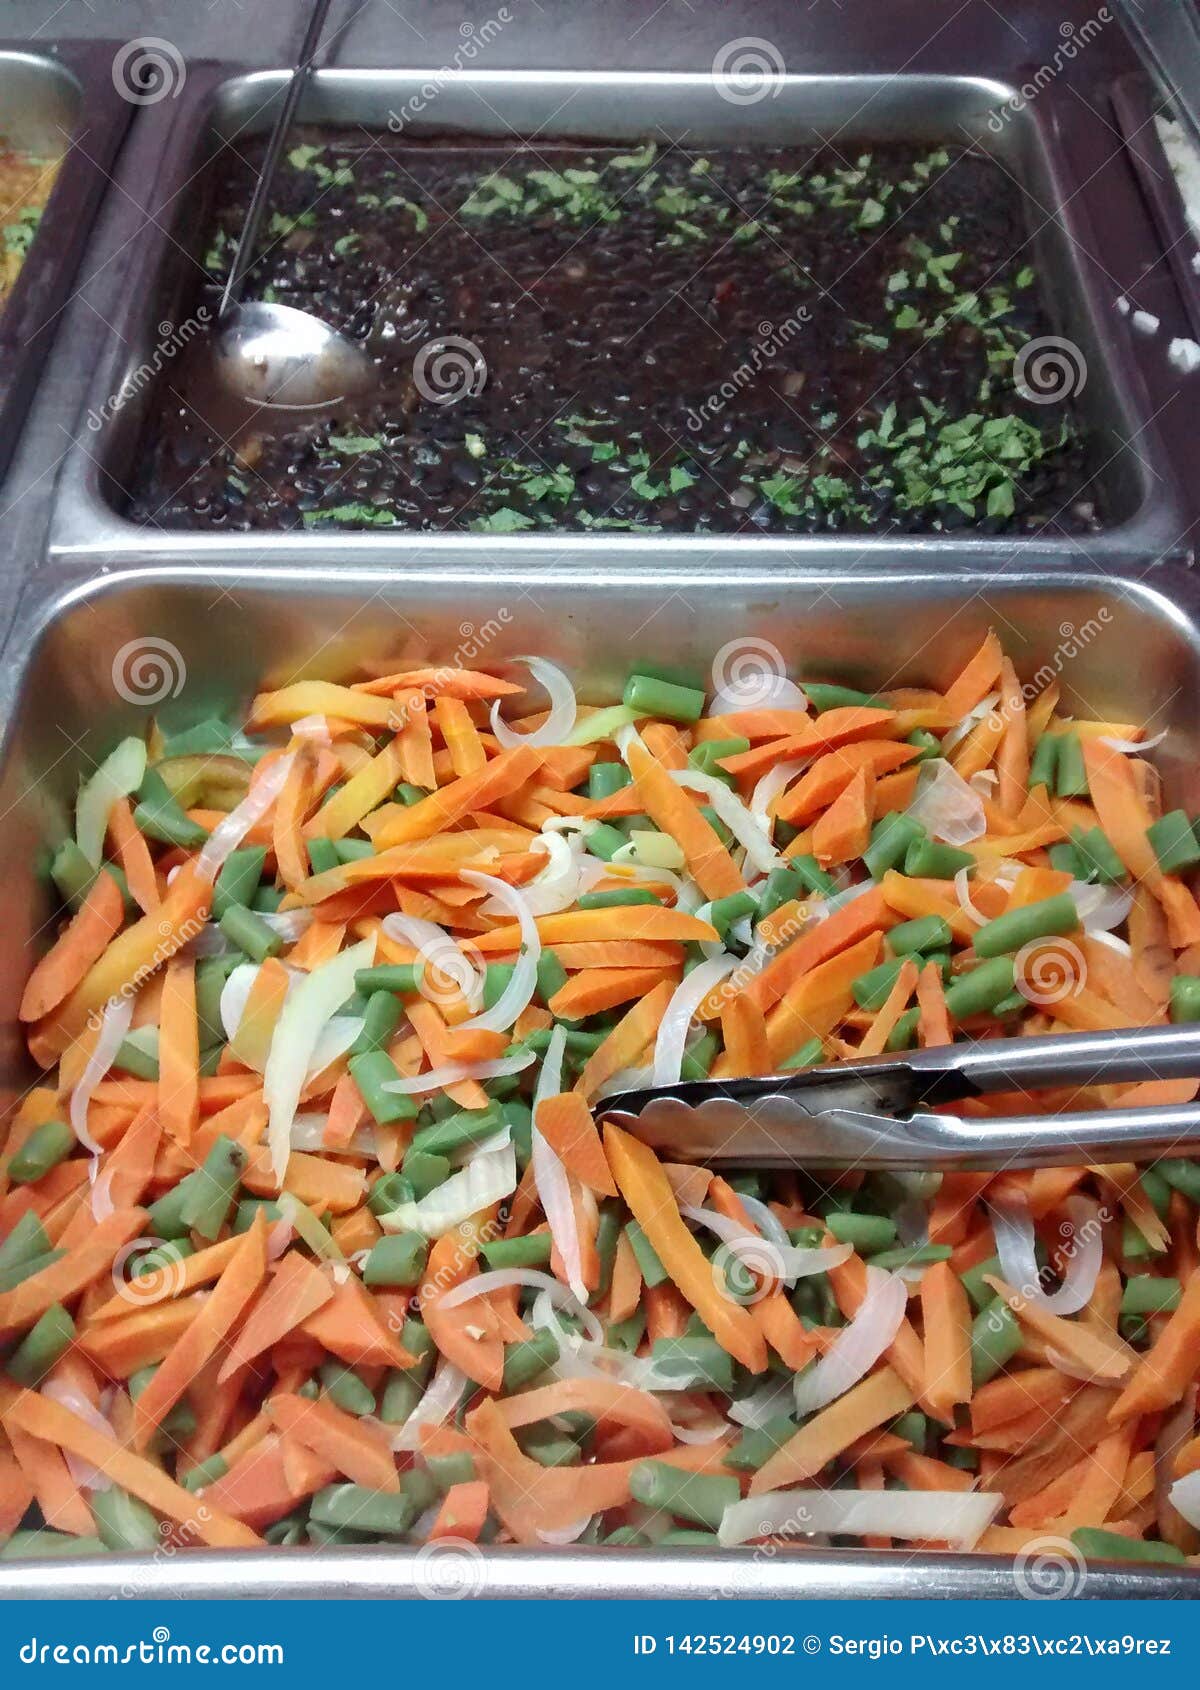 cooked mixed vegetables and black caraotas lists to eat in restaurant